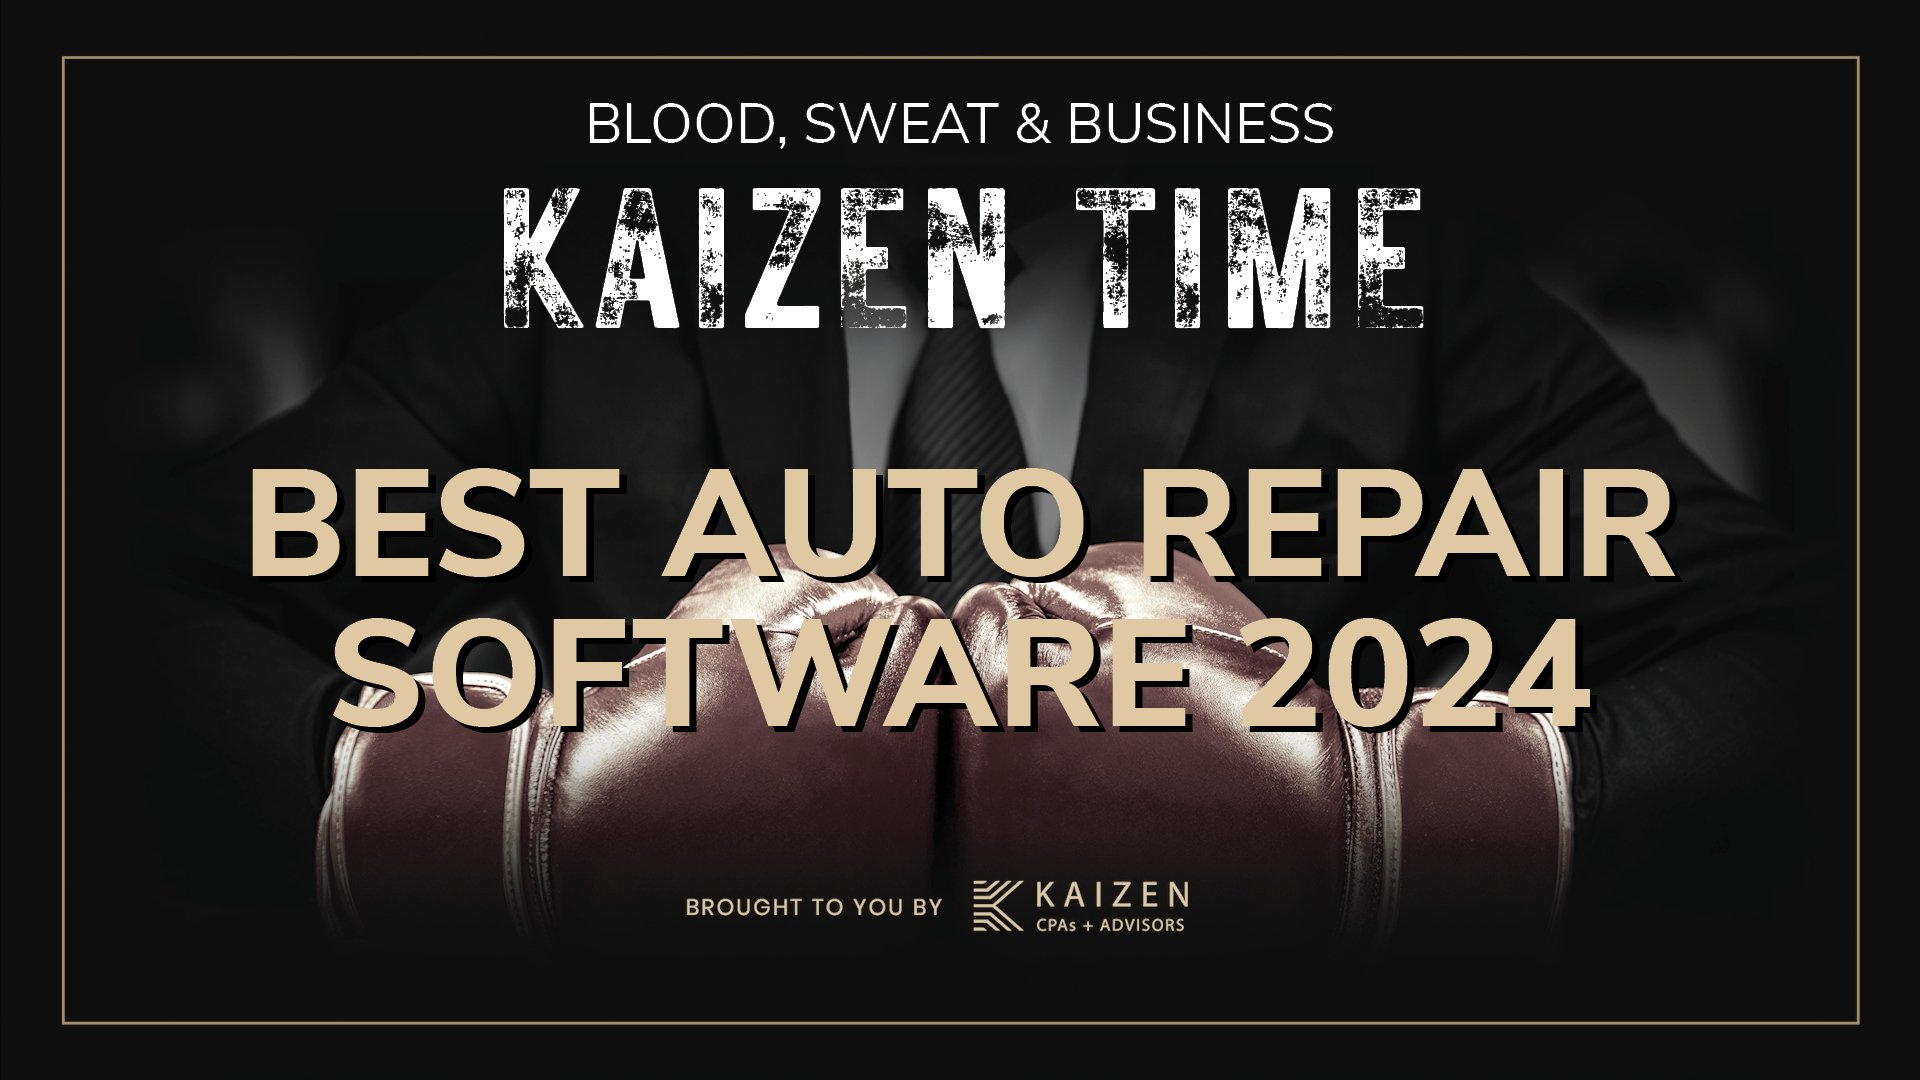 What are the best software packages for automotive repair shops?